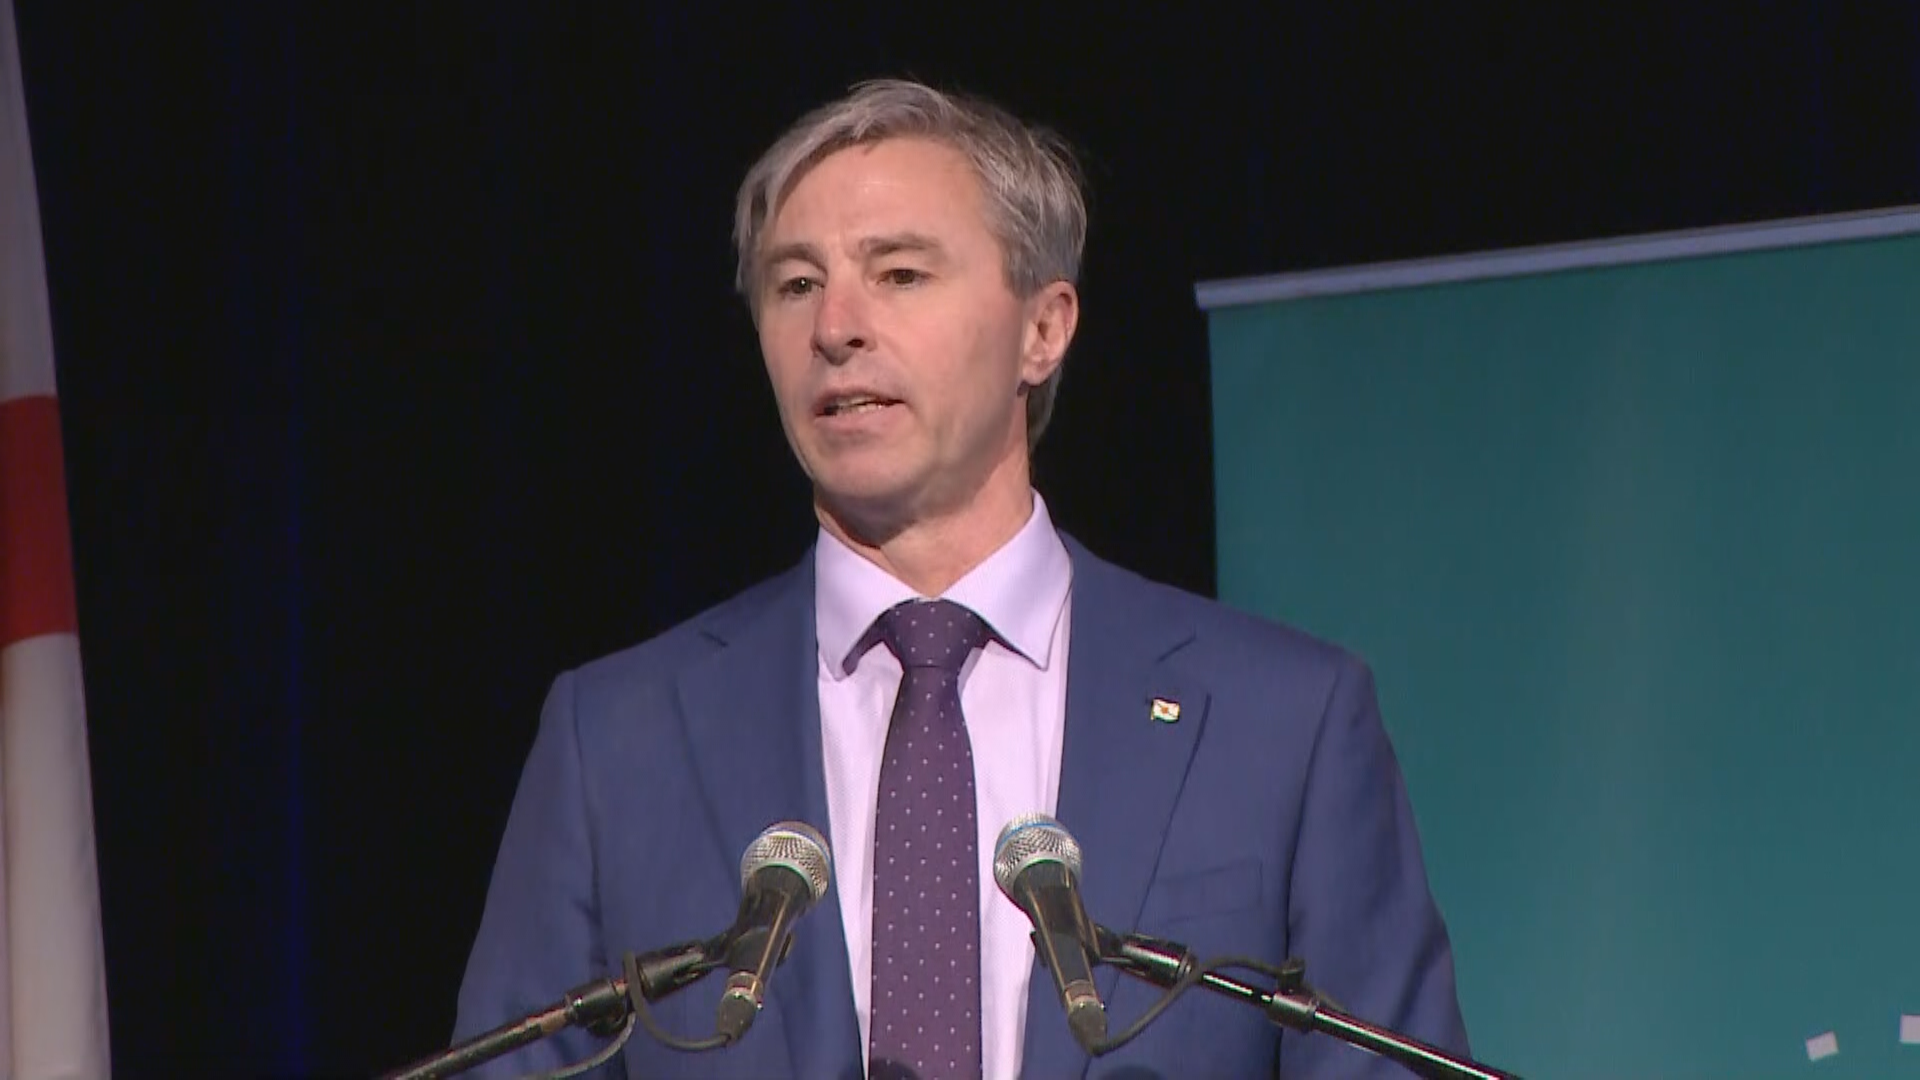 Premier tells party at AGM fixing health care in N.S. an ‘urgent’ priority